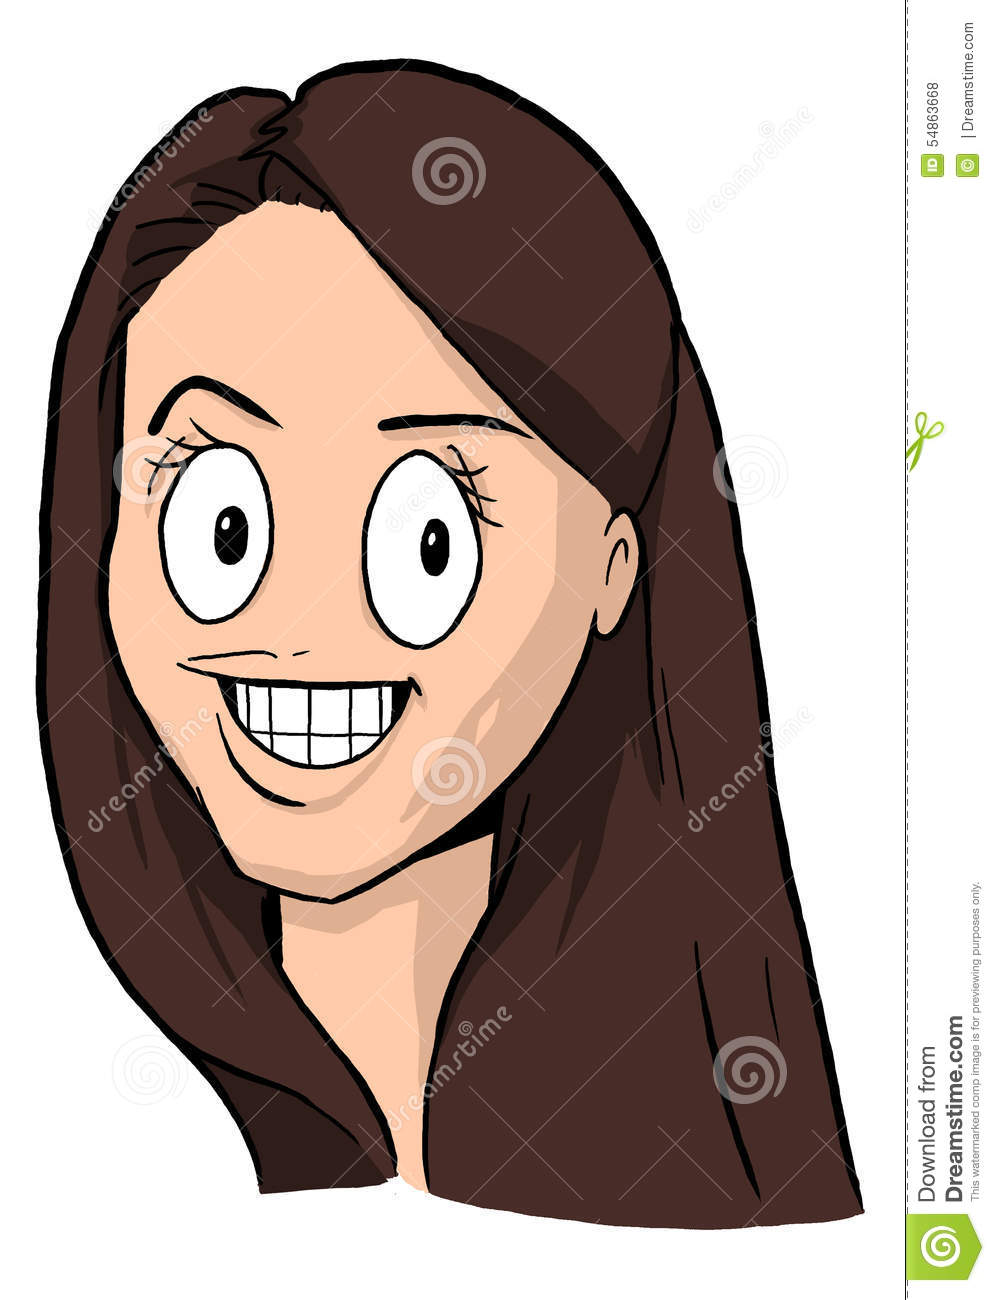 Caricature Of Girl With Dark Brown Hair, Big Eyes And Big Smile.